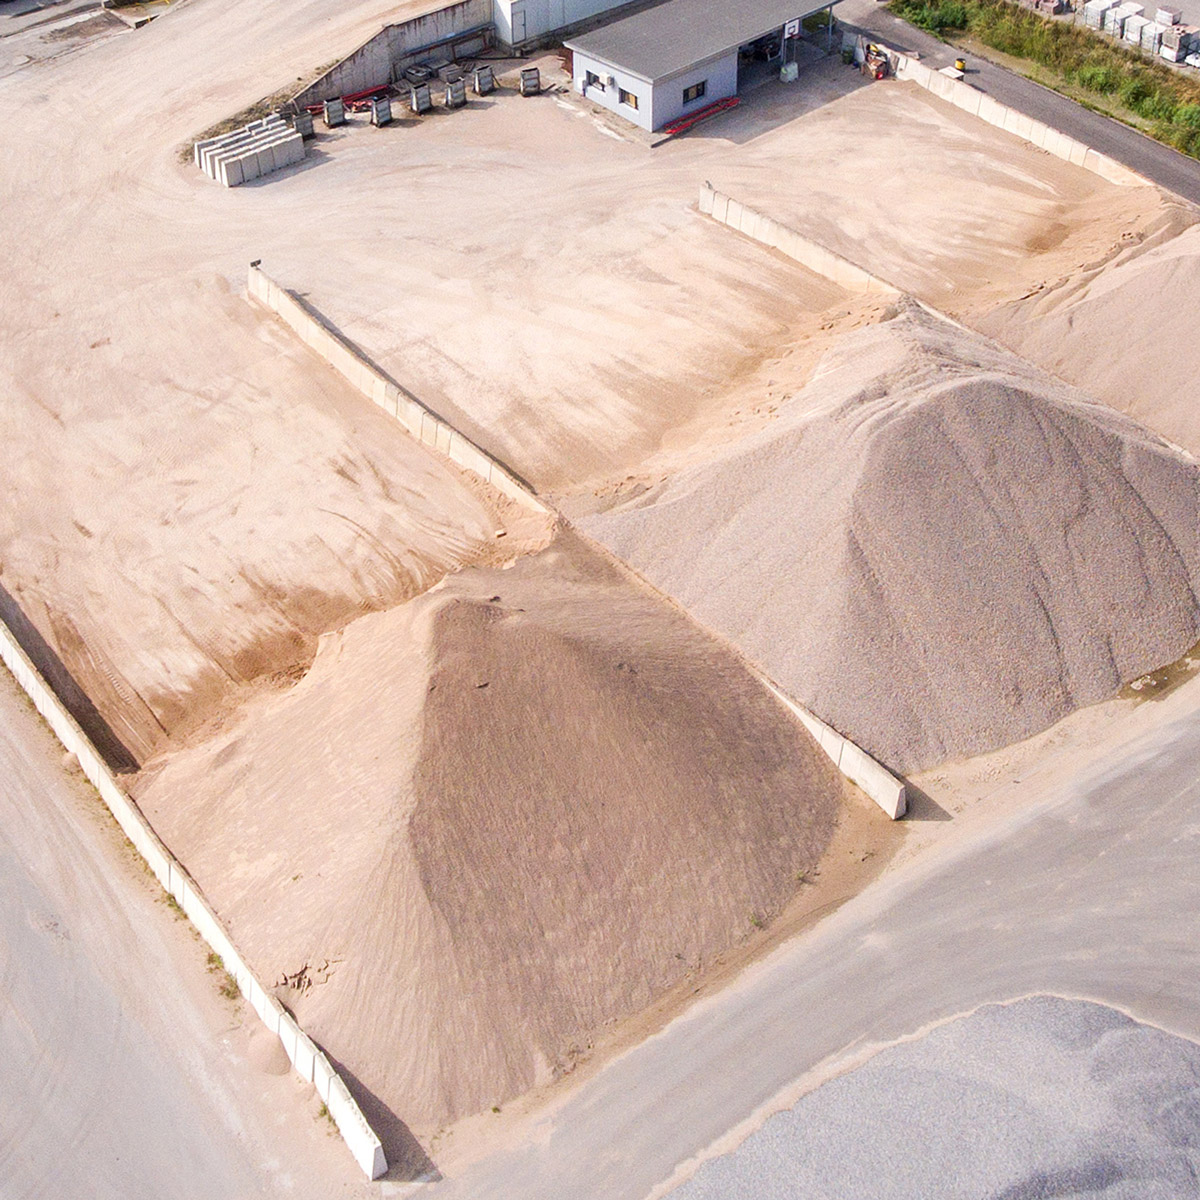 three large piles of sand at factory to be delivered by tkm materials